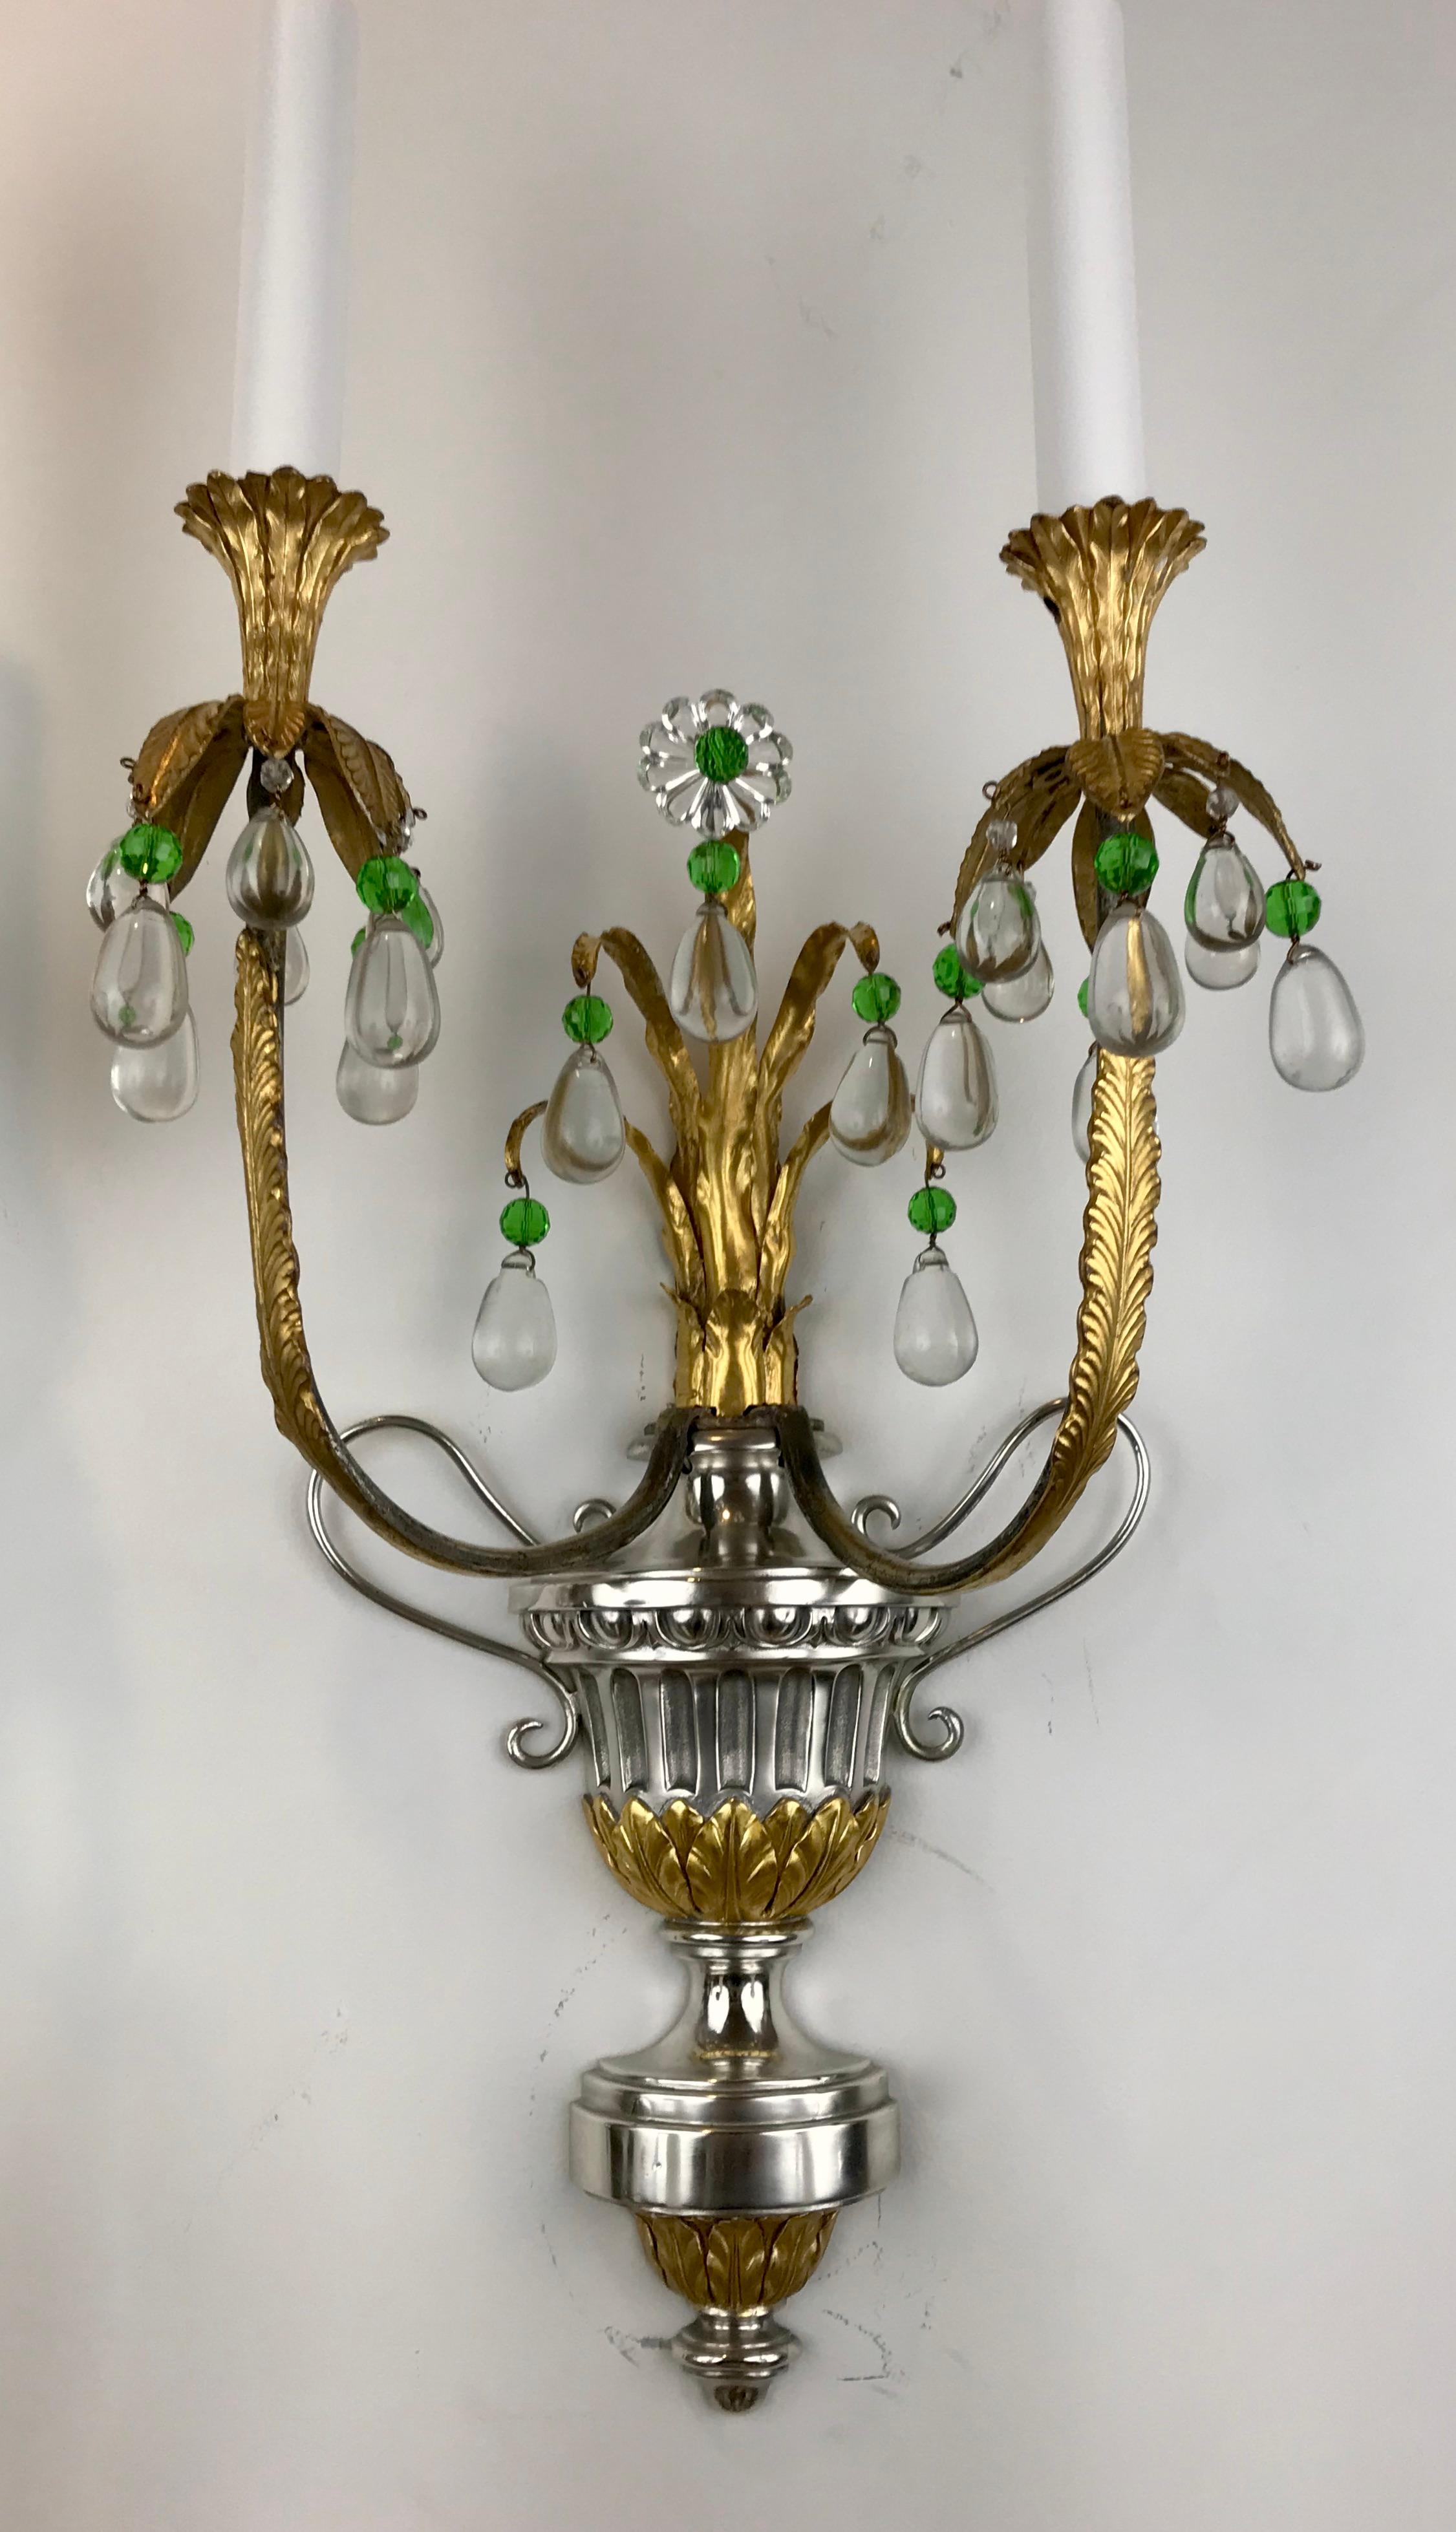  Four Silver and Gilt Bronze Sconces with Green Crystal Accents by Caldwell For Sale 6